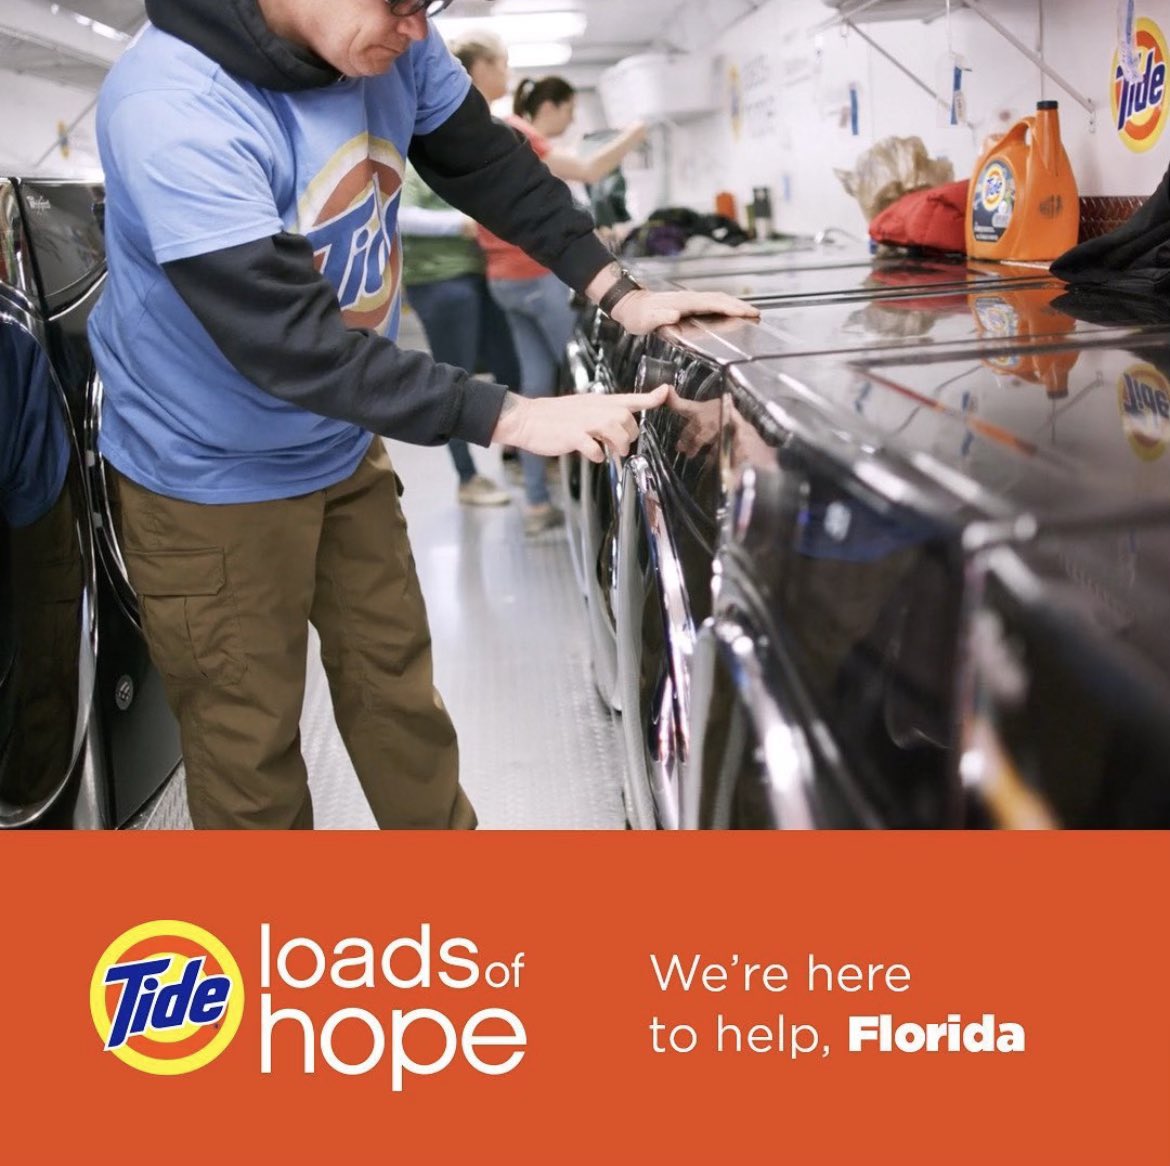 We are here to help, Florida. Tide Loads of Hope is here to help.  The Loads of Hope team is providing free laundry services starting September 7th at the Walmart Supercenter (1900 S Jefferson St. Perry, FL 32348) from 9 am – 5 pm local time or until capacity is reached.